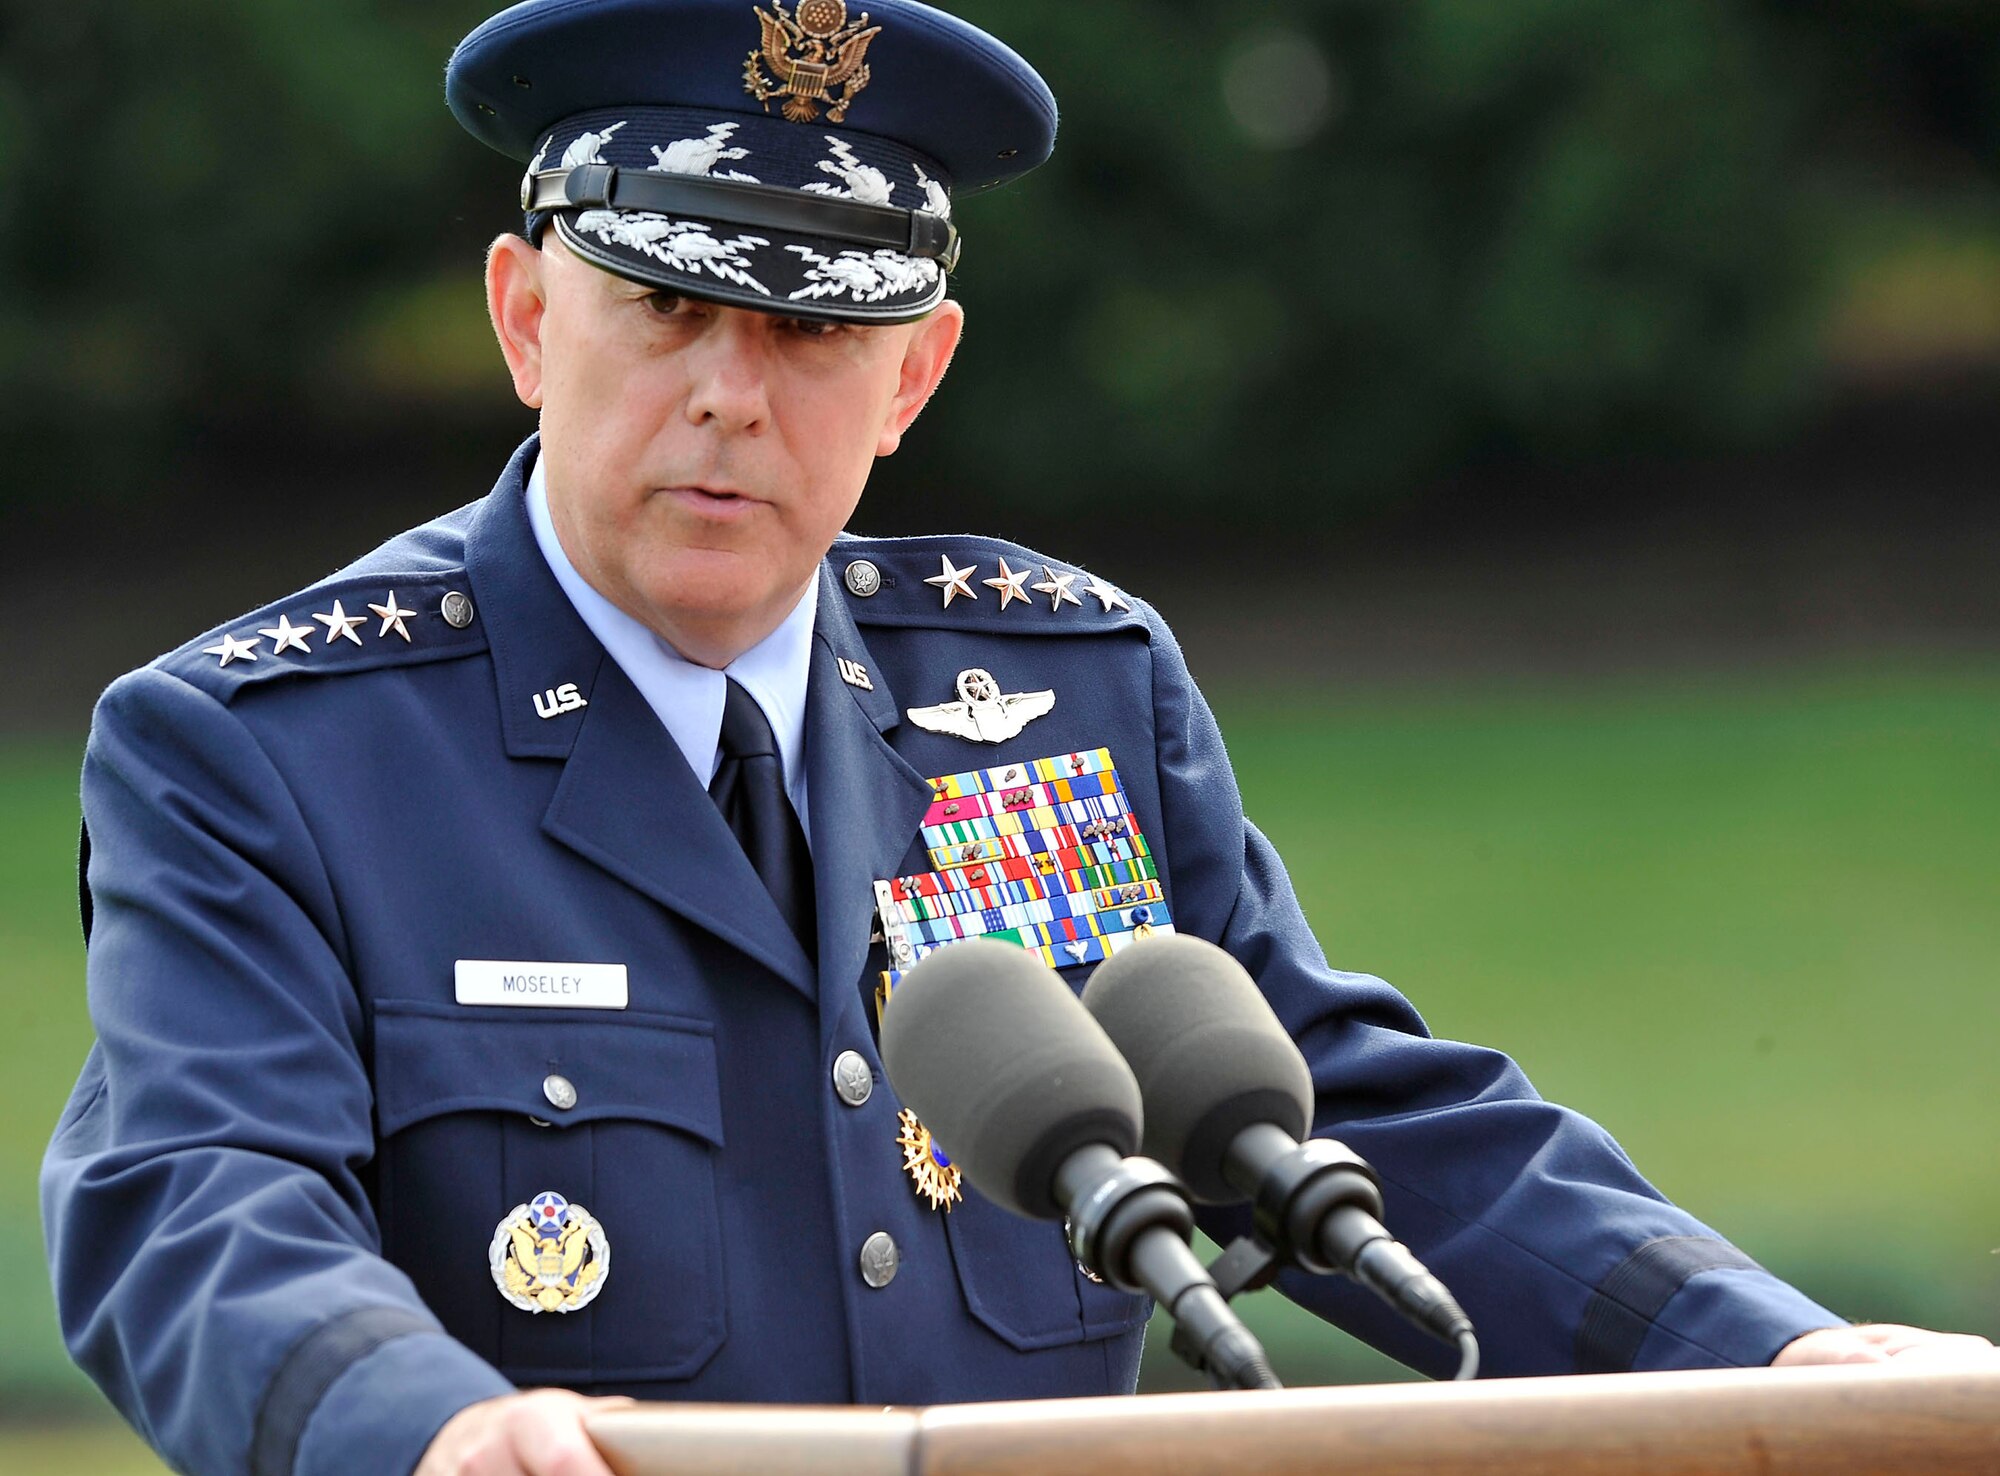 Air Force Chief of Staff Gen. T. Michael Moseley addresses the audience July 11 during his retirement ceremony at Bolling Air Force Base, D.C. (U.S. Air Force photo/Scott M. Ash)